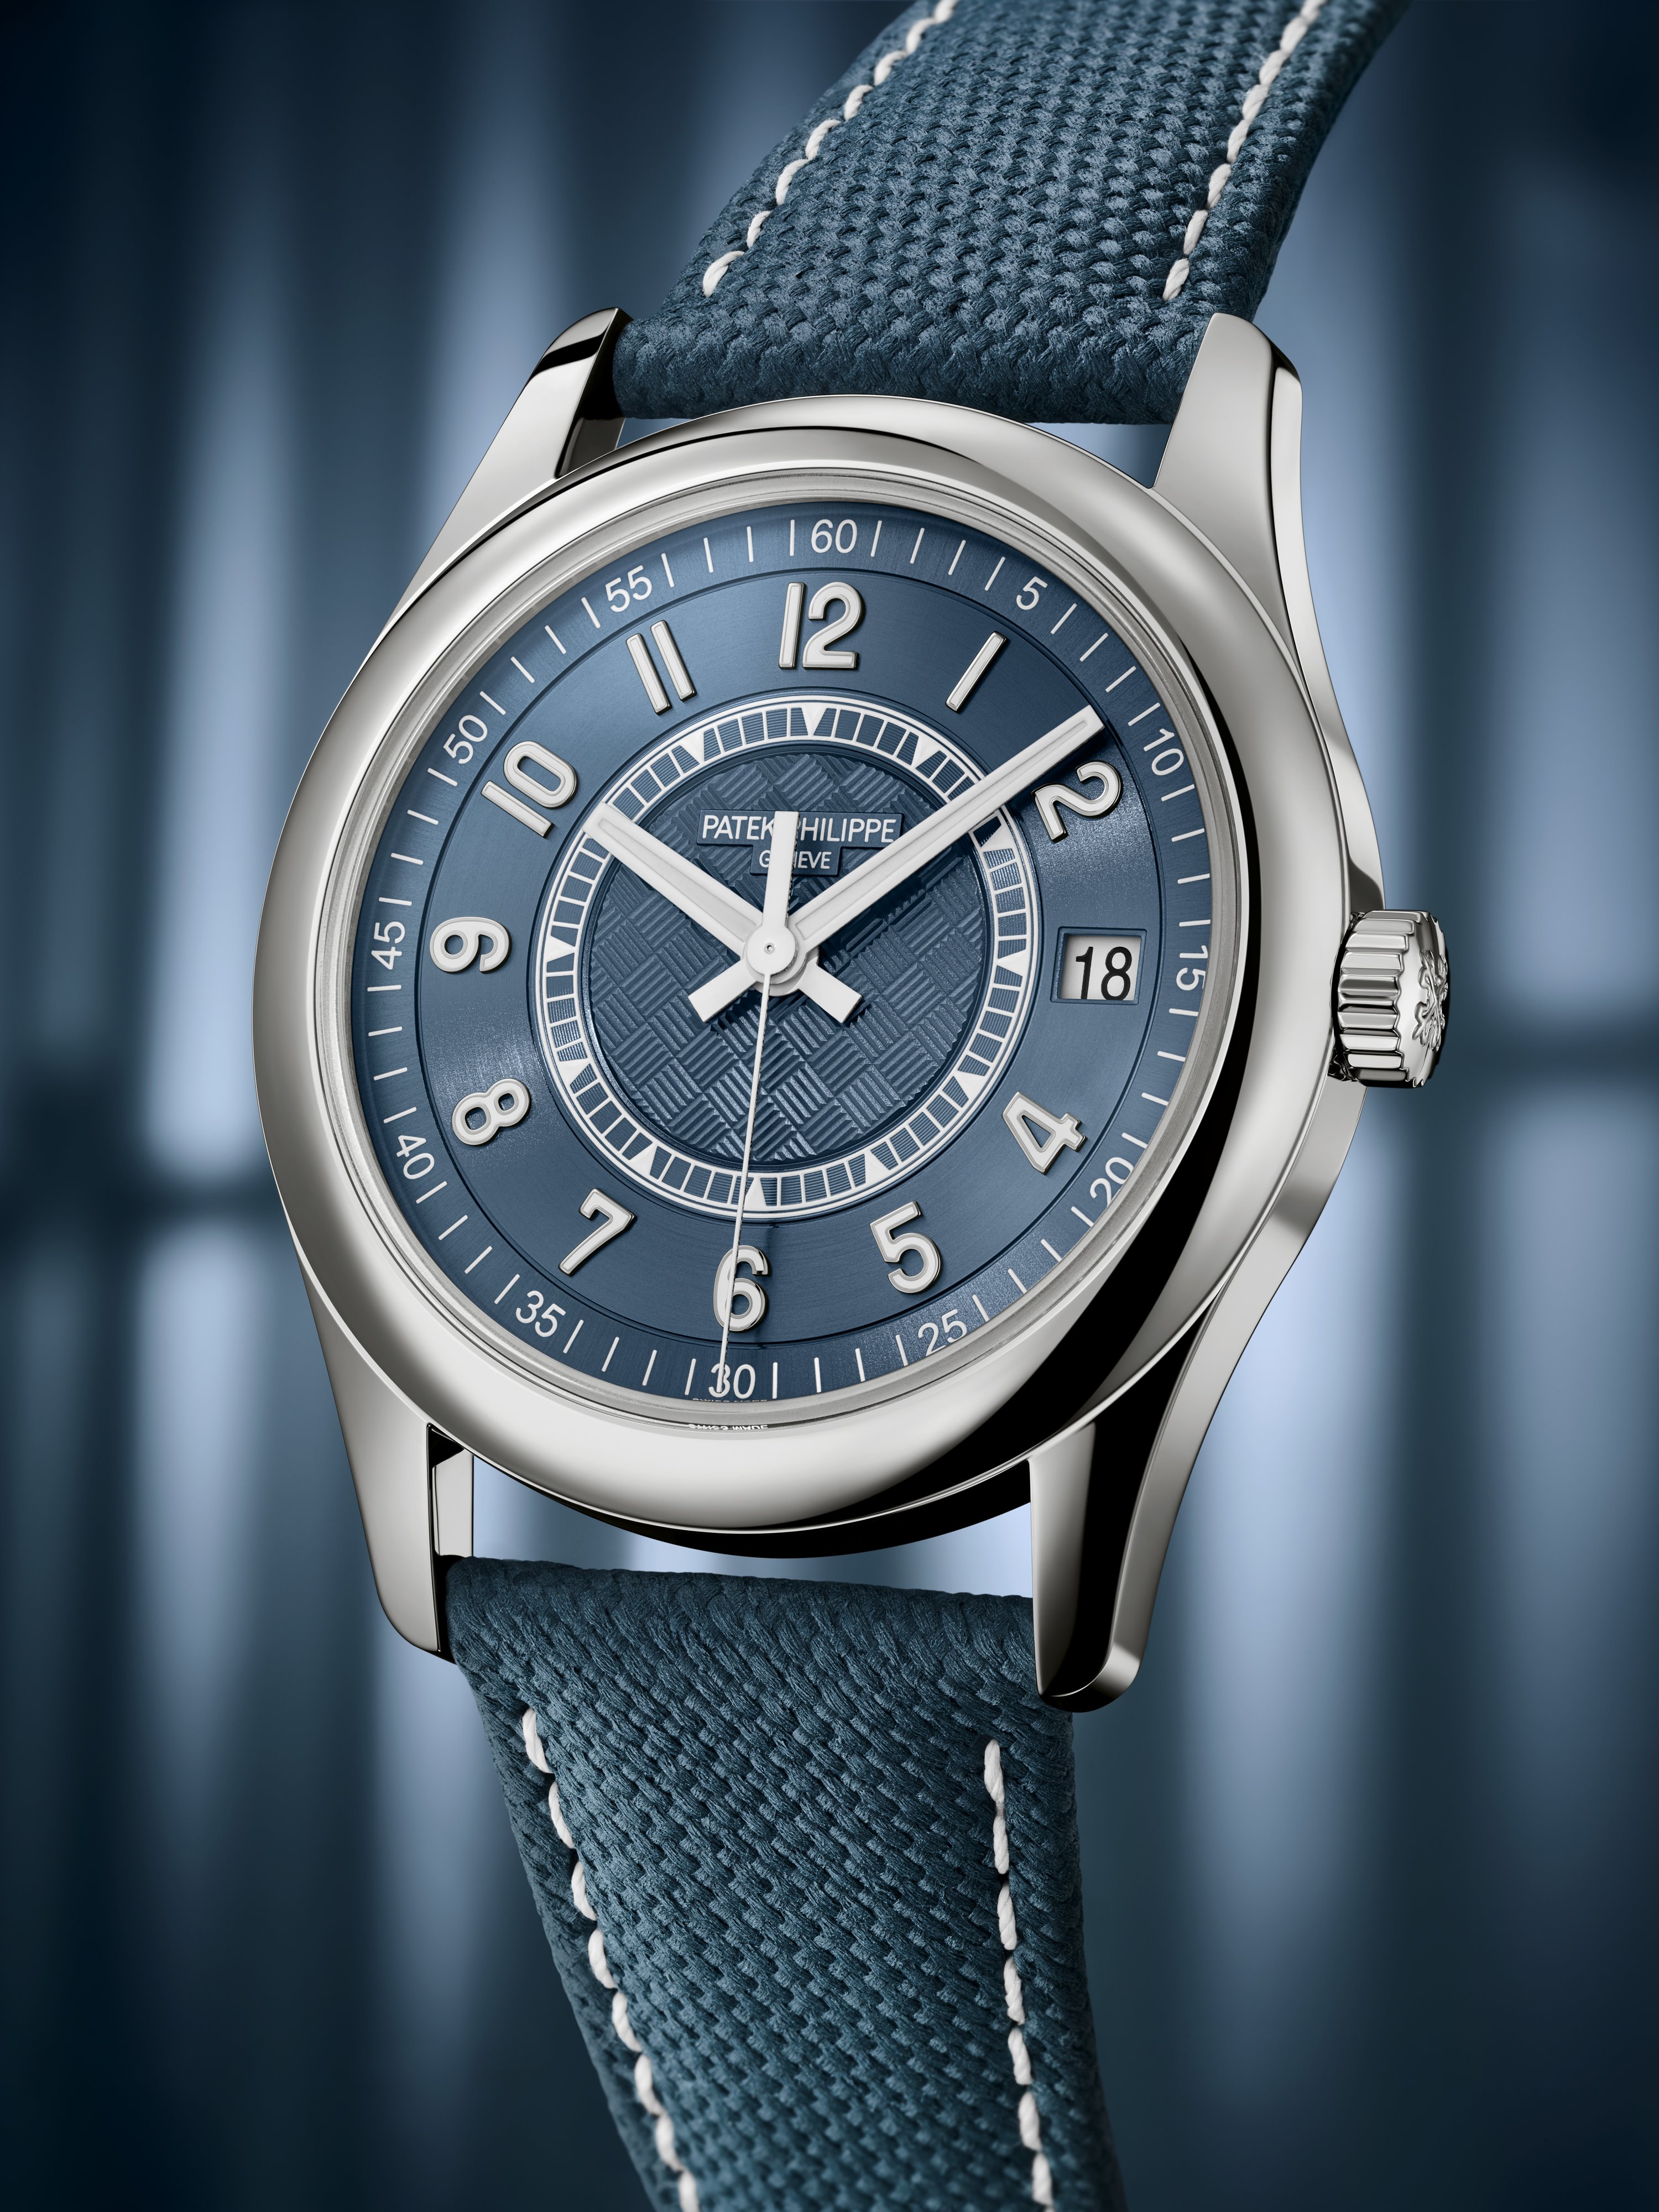 Patek Philippe Stuns Everyone With The All New Calatrava Ref 6007a 001